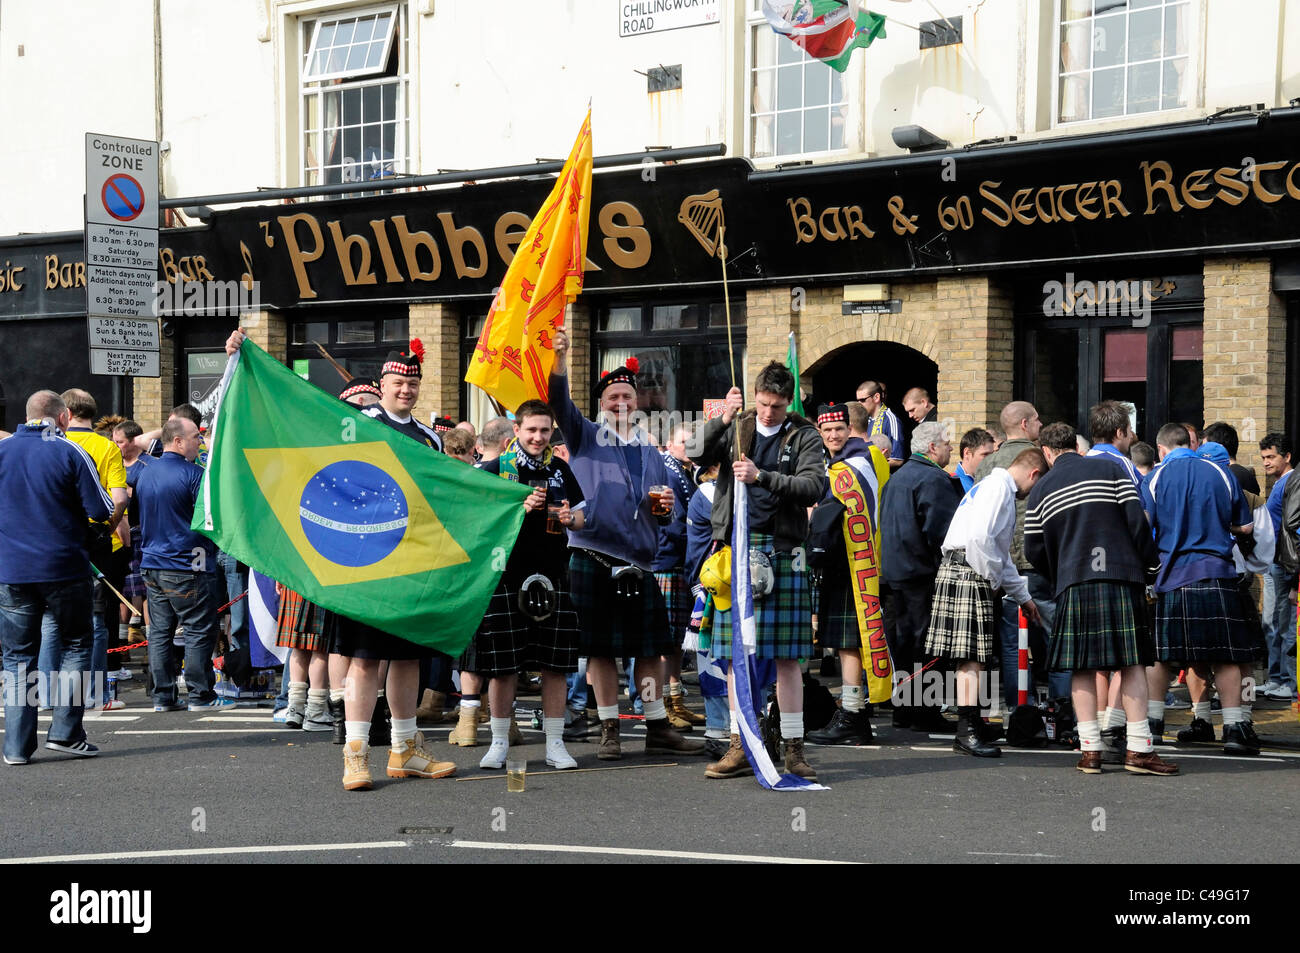 Scottish football supporters with flags outside Phibbers pub in Holloway London England UK Stock Photo